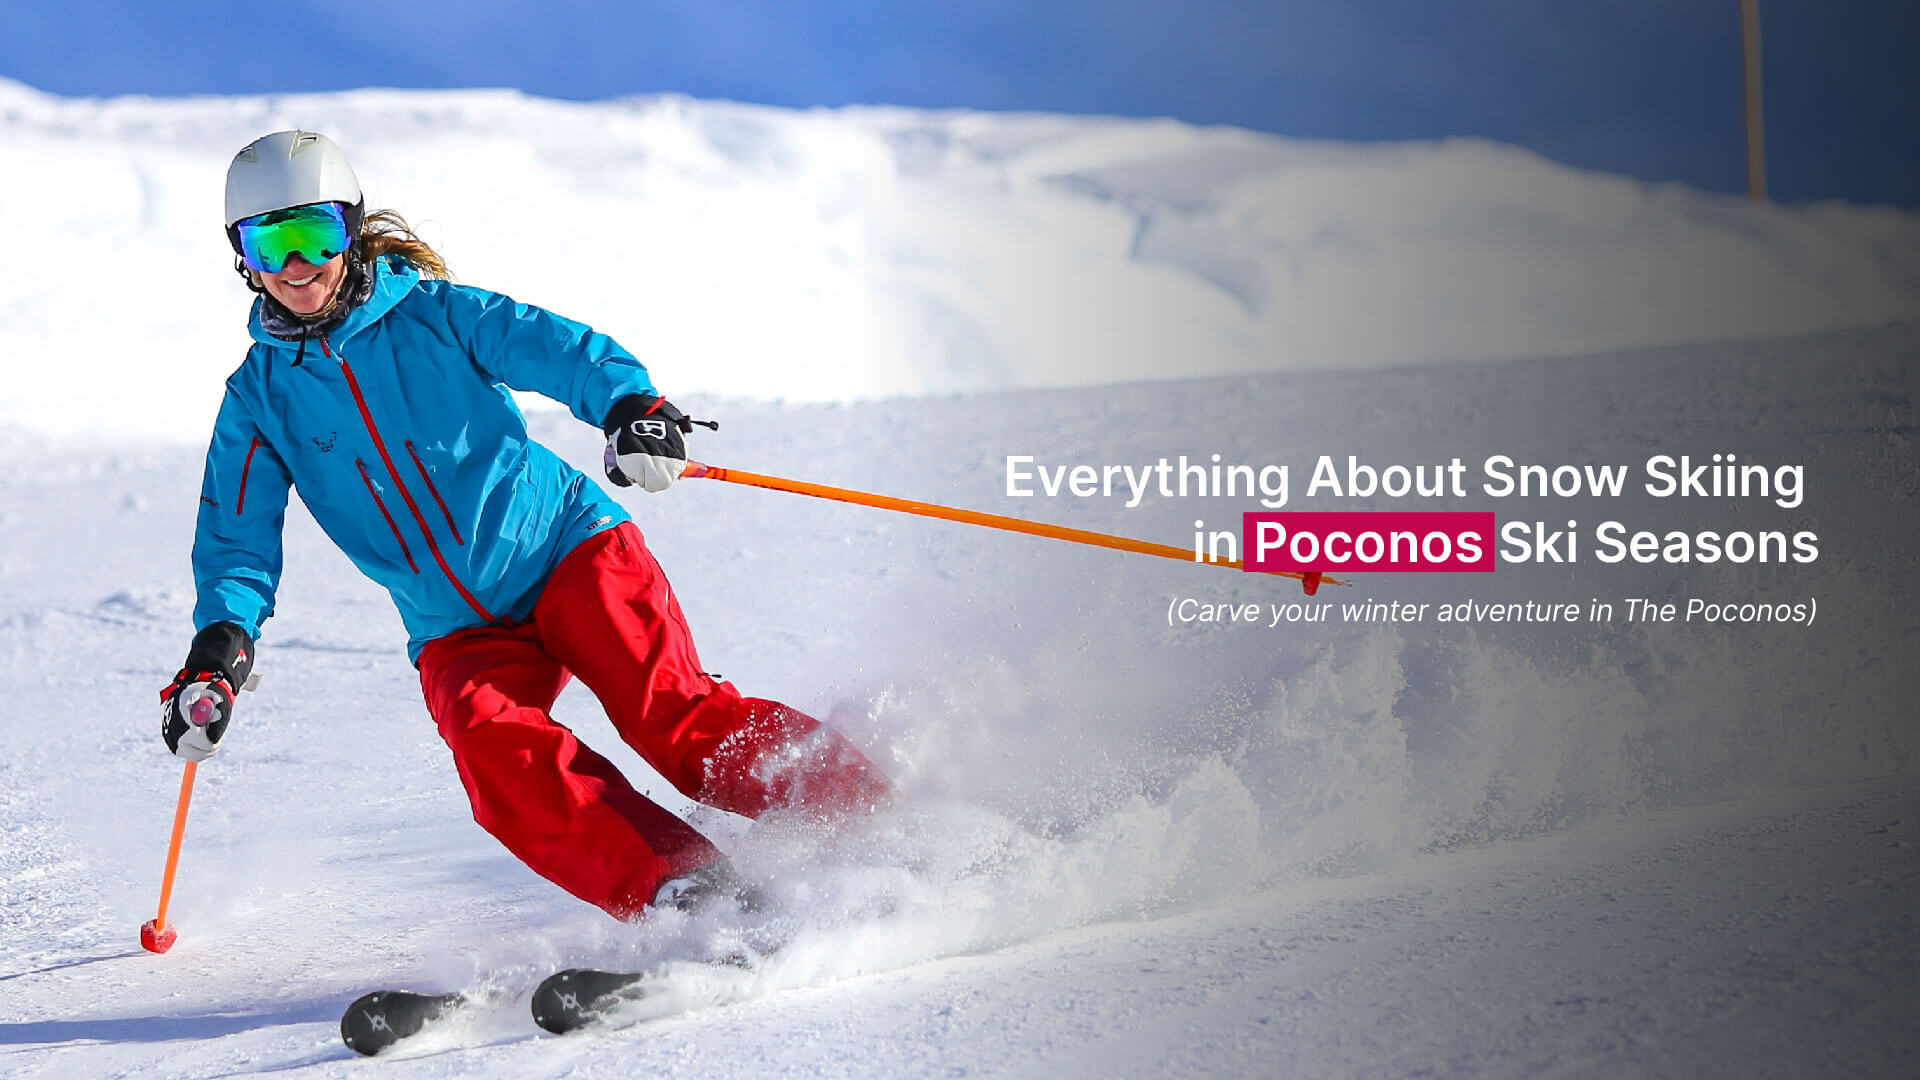 Everything About Snow Skiing in Poconos Ski Seasons - HolidayKeepers